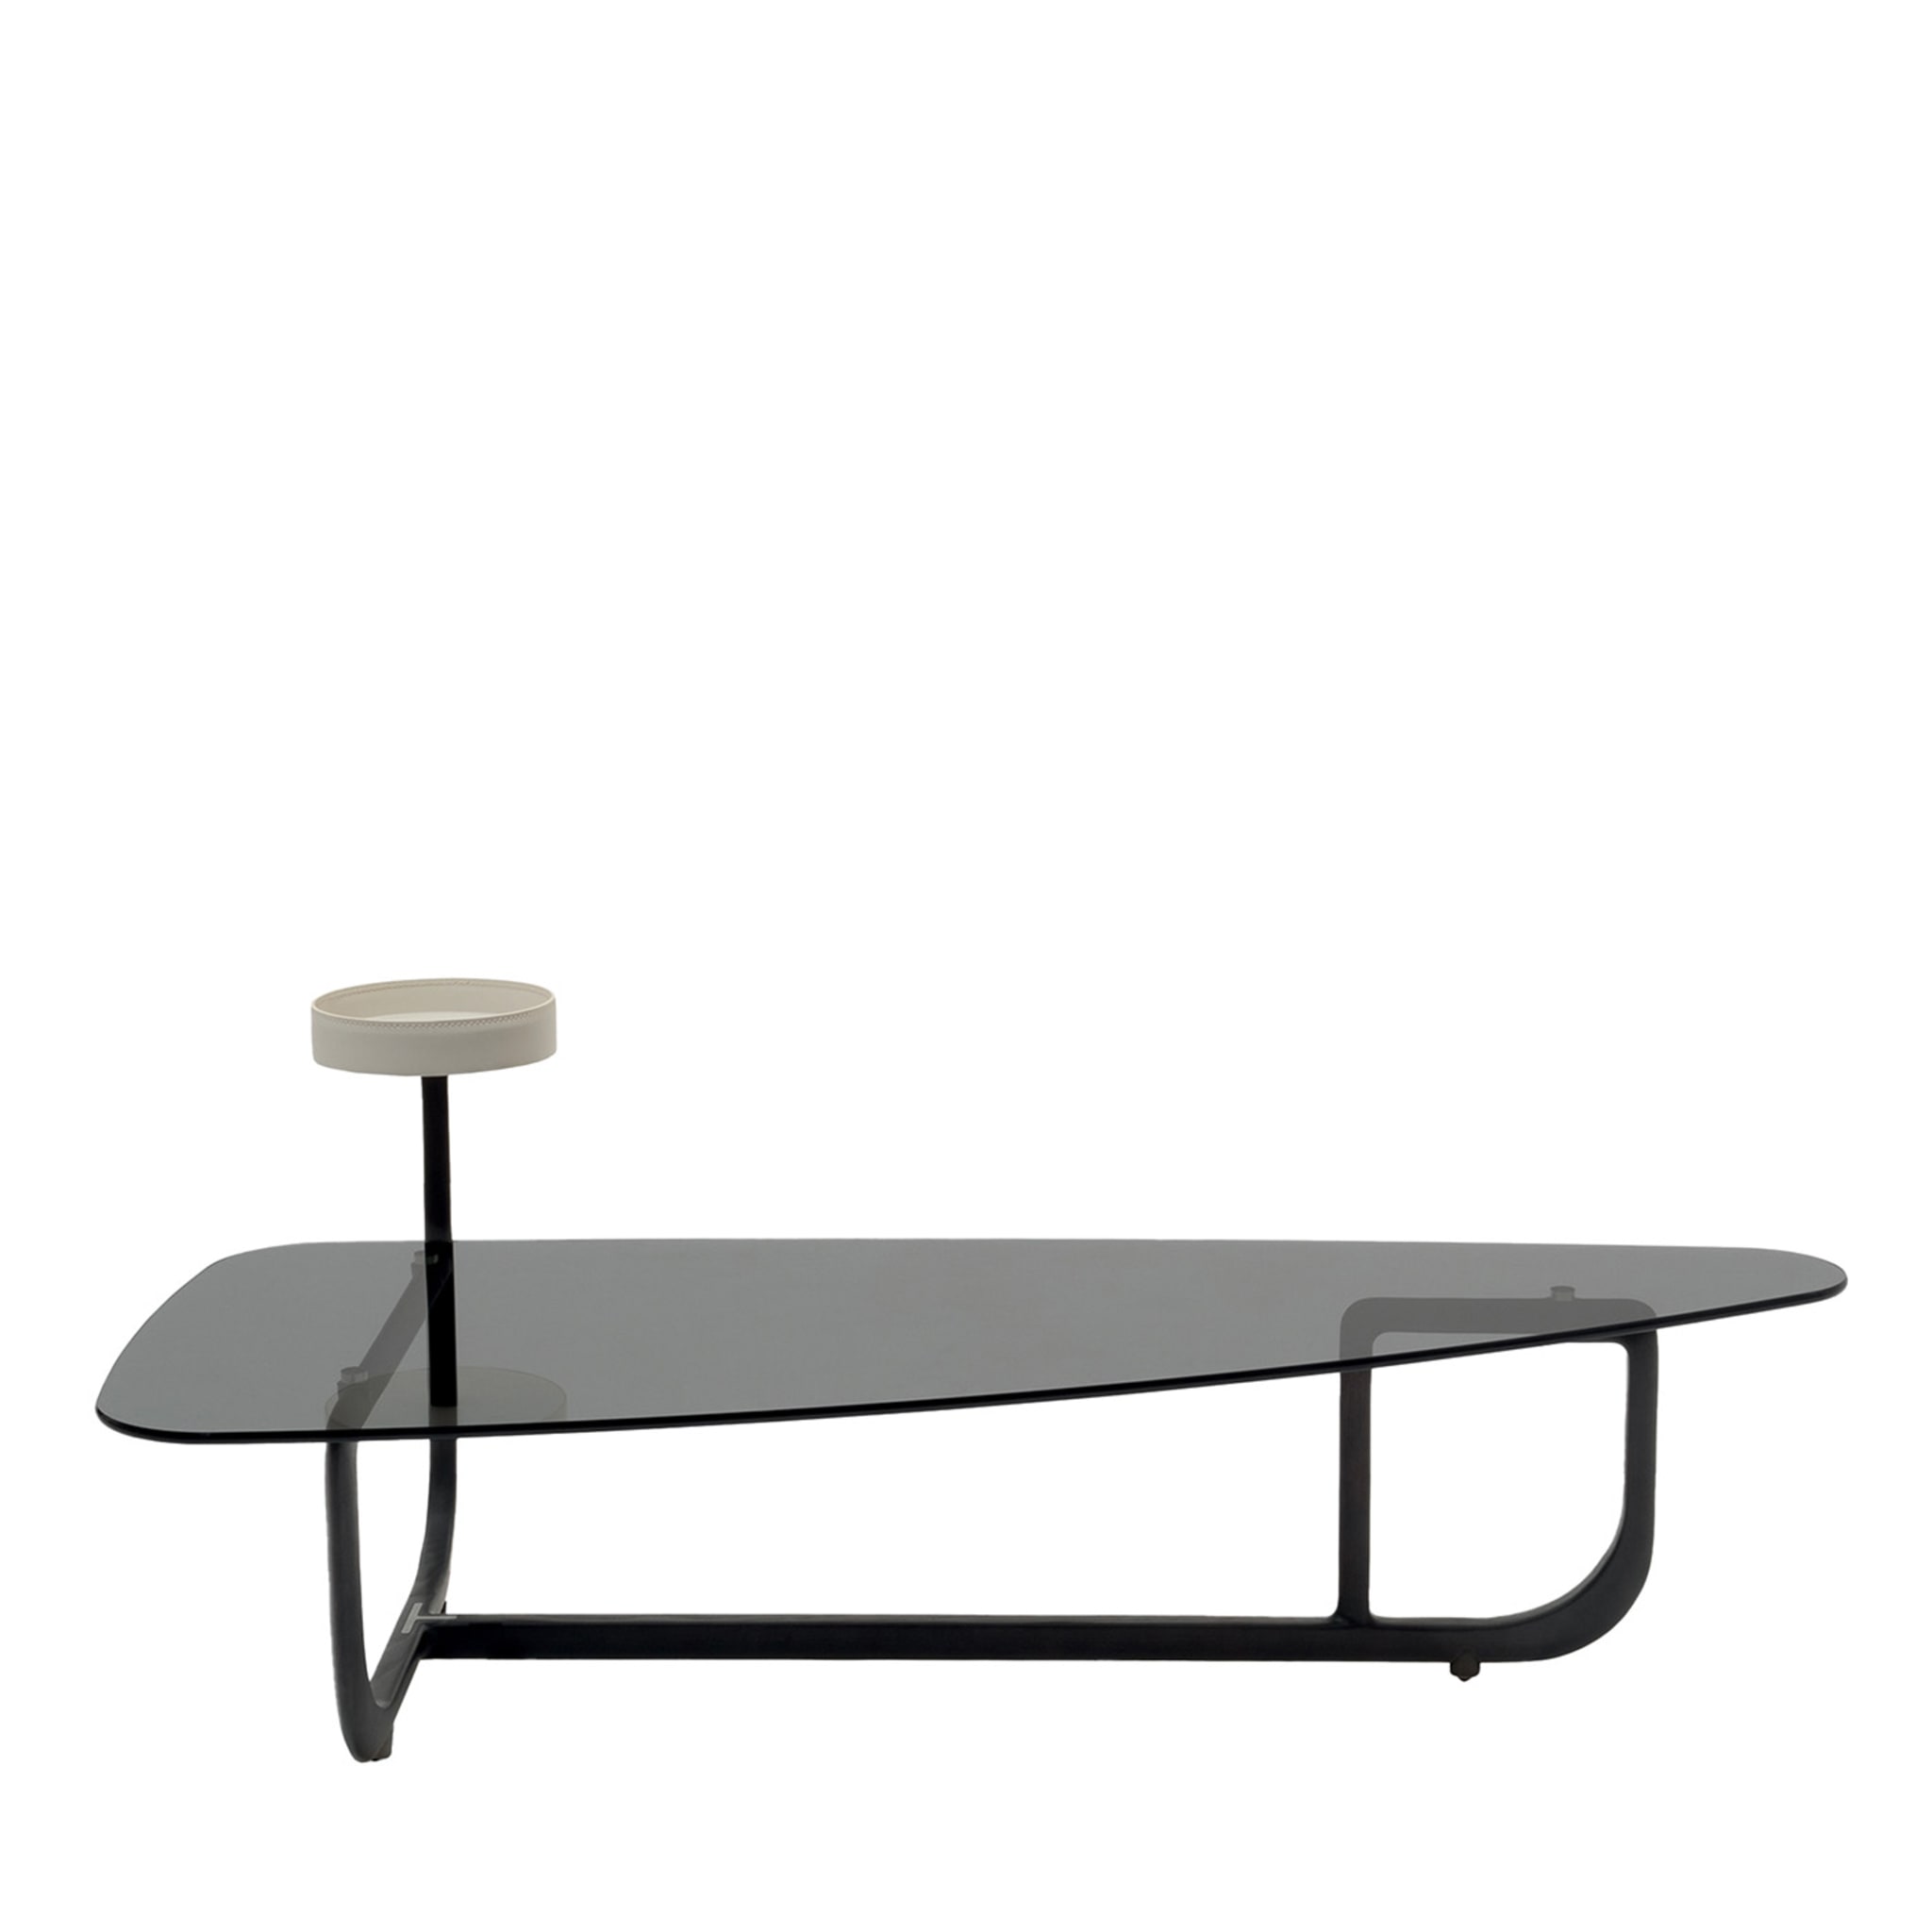 Amiral Coffee Table - Main view